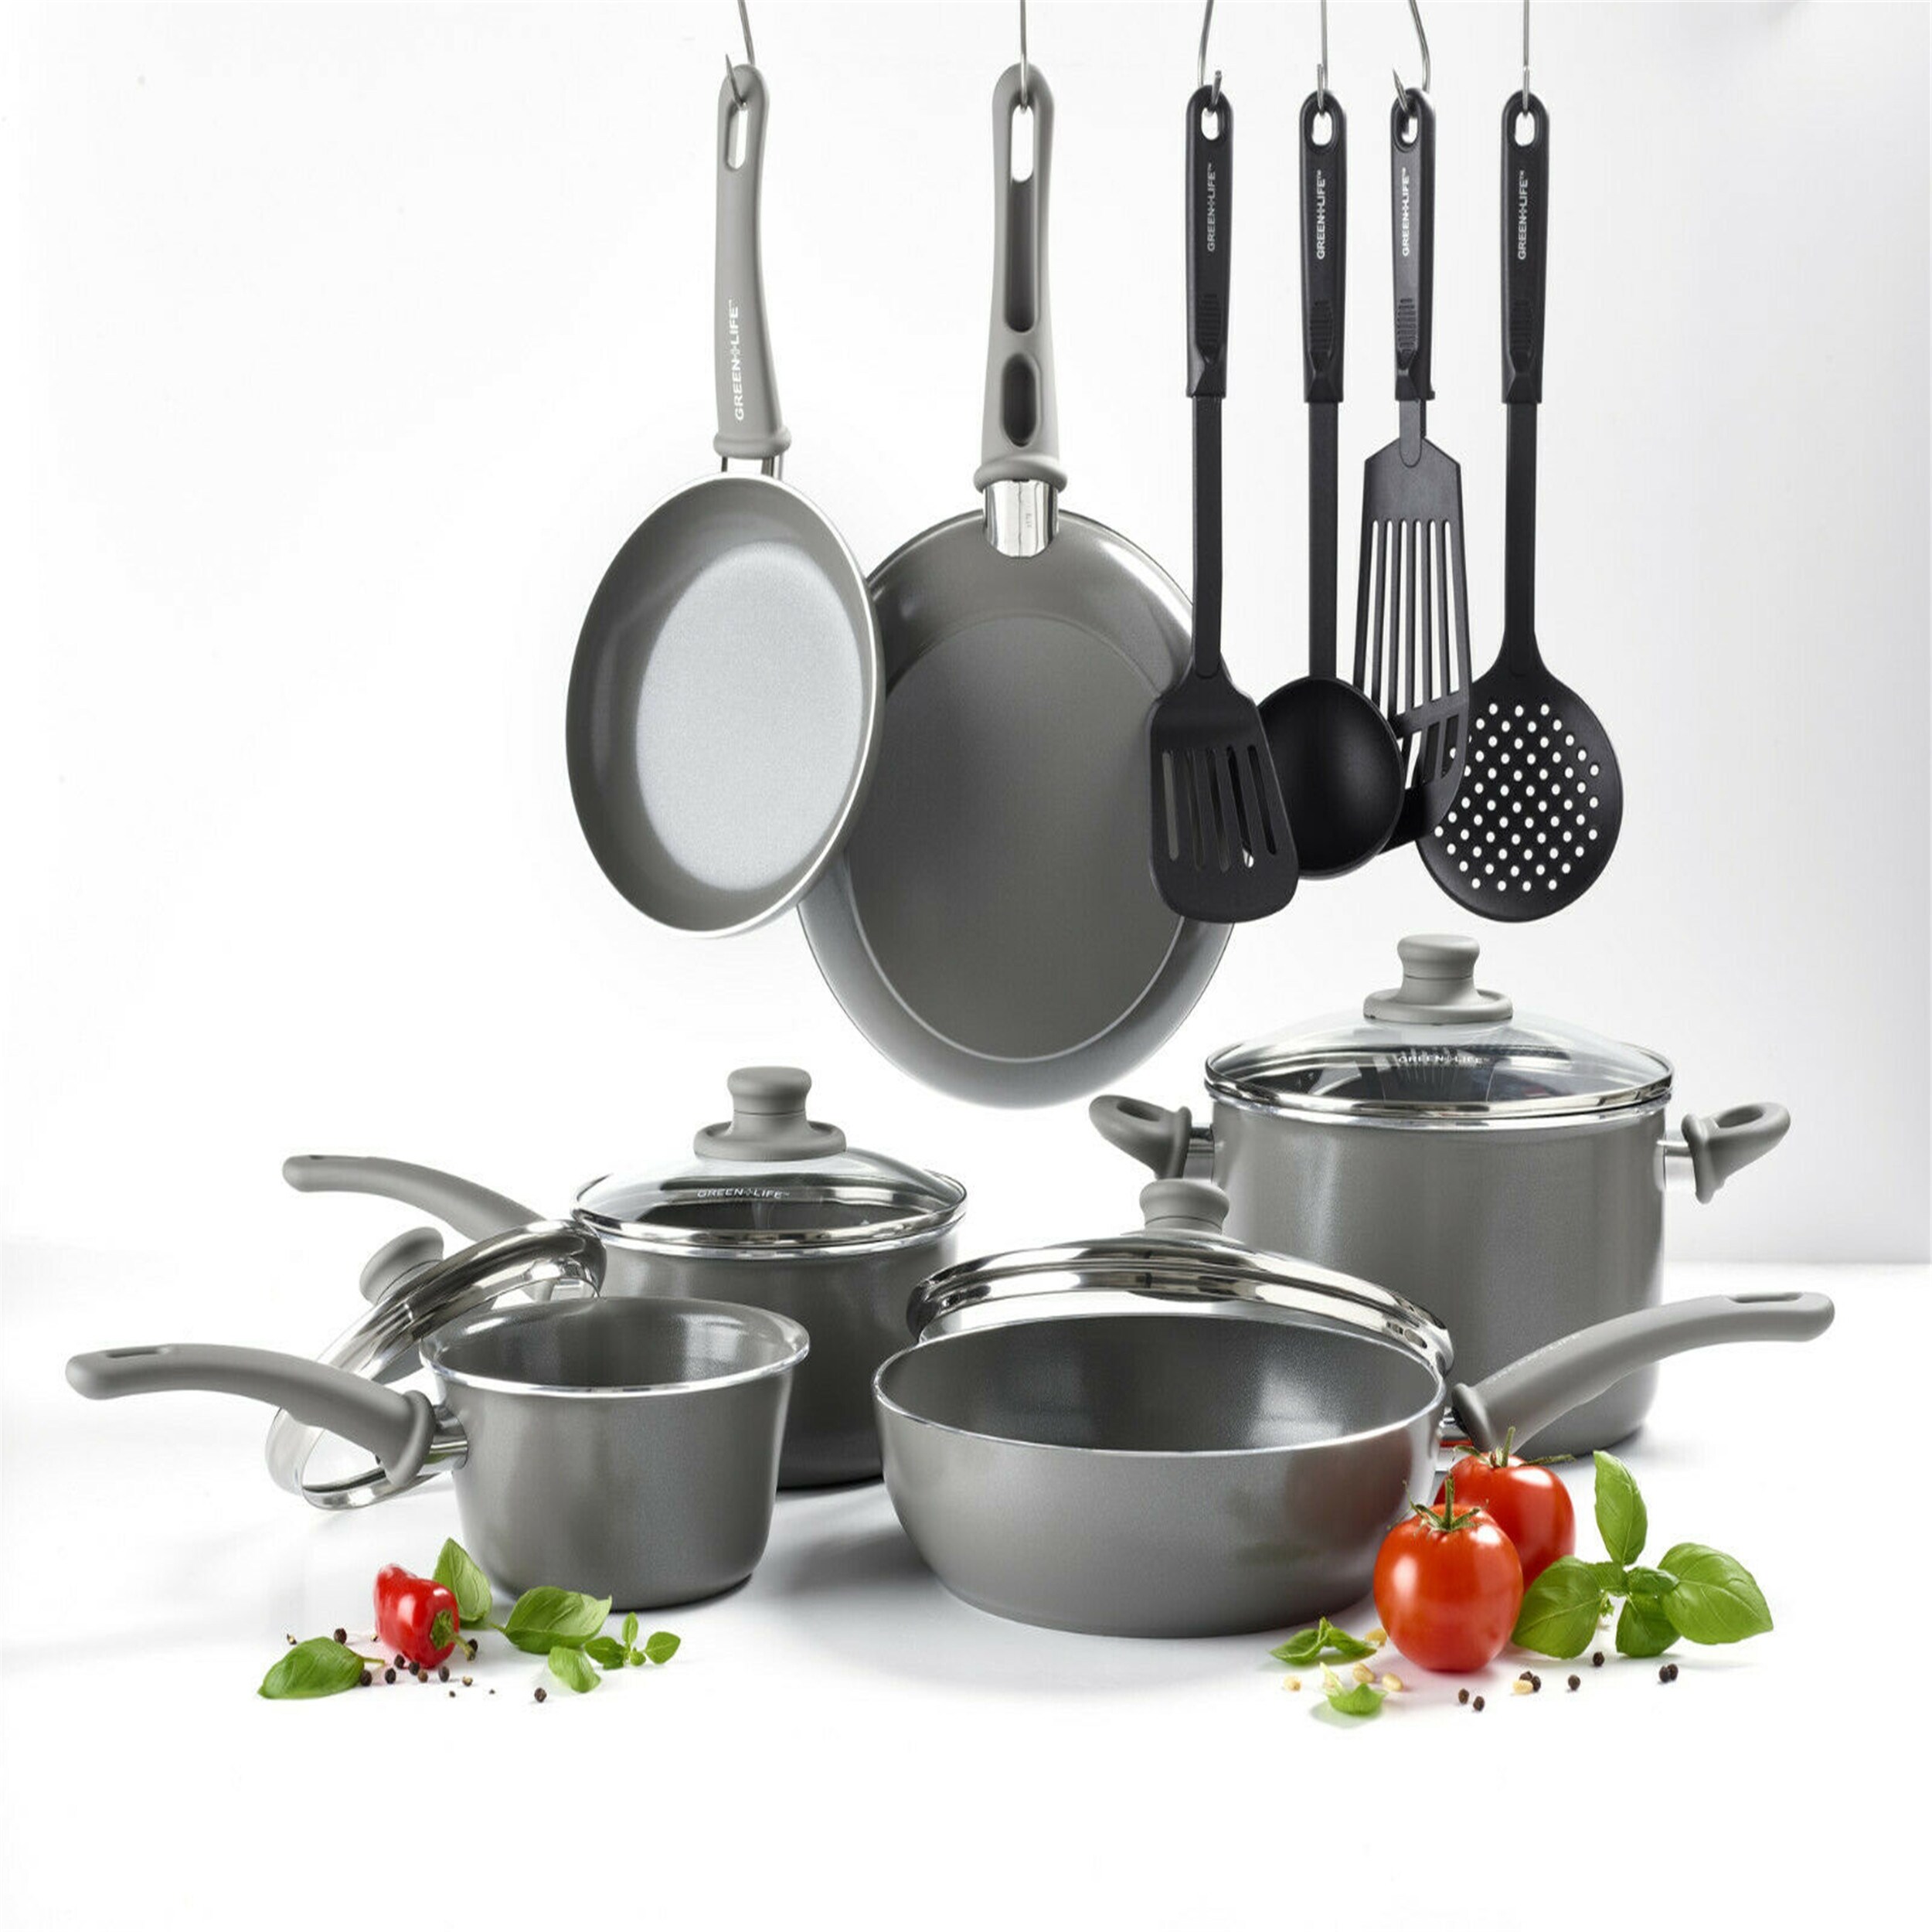 https://ak1.ostkcdn.com/images/products/is/images/direct/64a53b993ed855f9b574f406b253e6e032194a5c/Cookware-Set-GreenLife-Ceramic-Nonstick-Pots-And-Pans-Dishwasher-Safe-14-Pieces.jpg